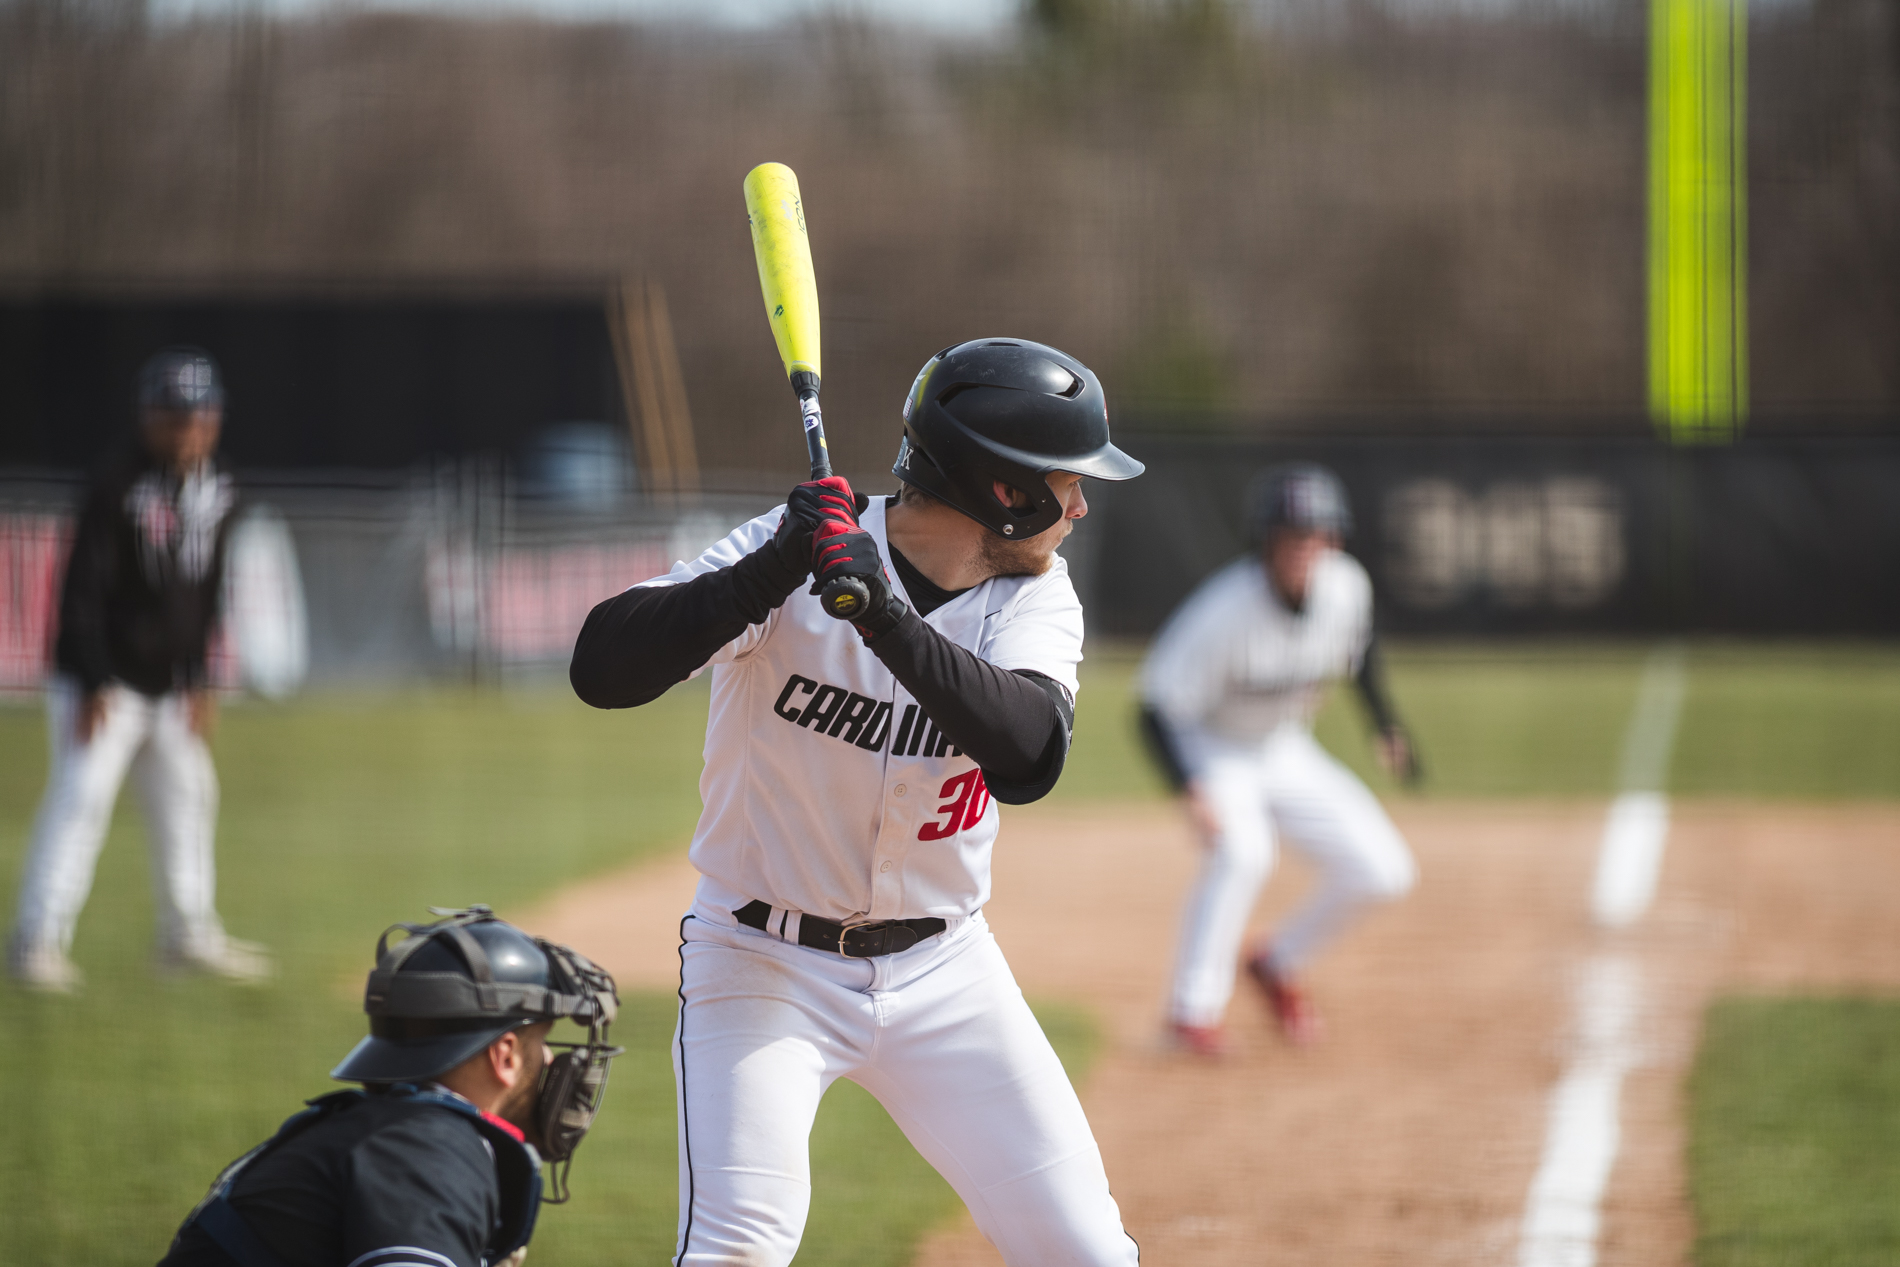 Baseball splits with UNOH on day 2 of weekend series